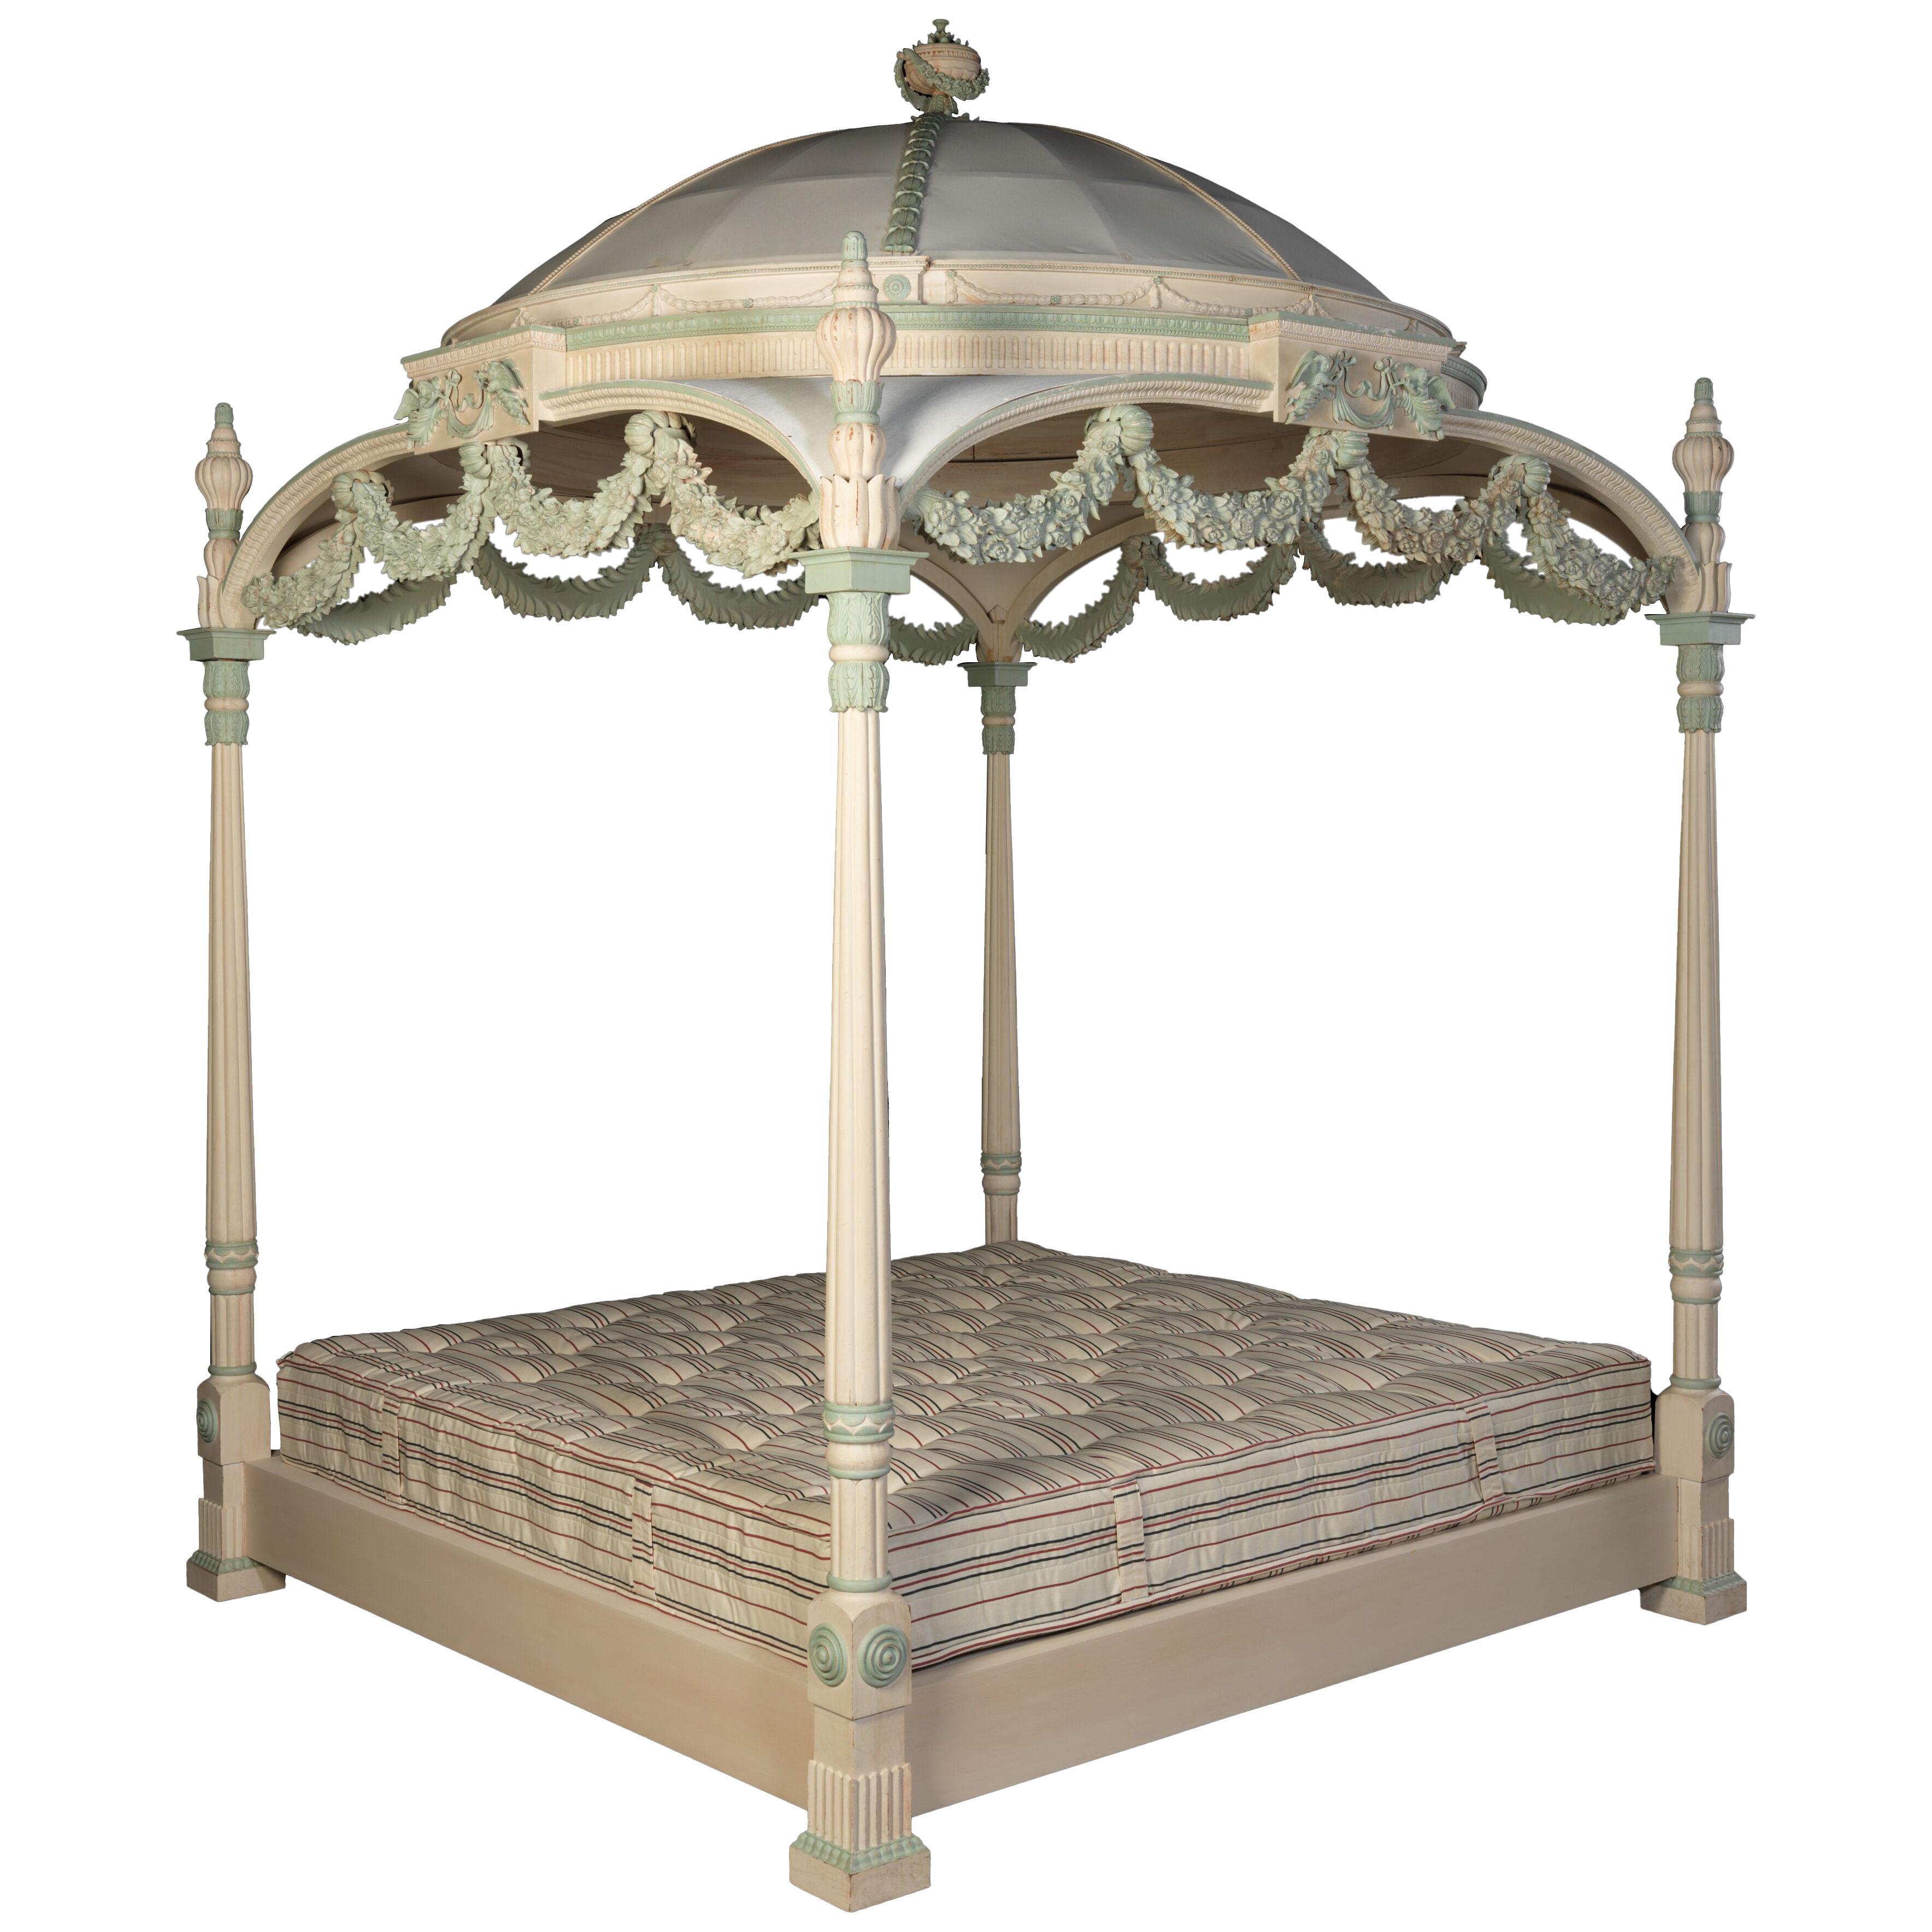 Harewood House Bed